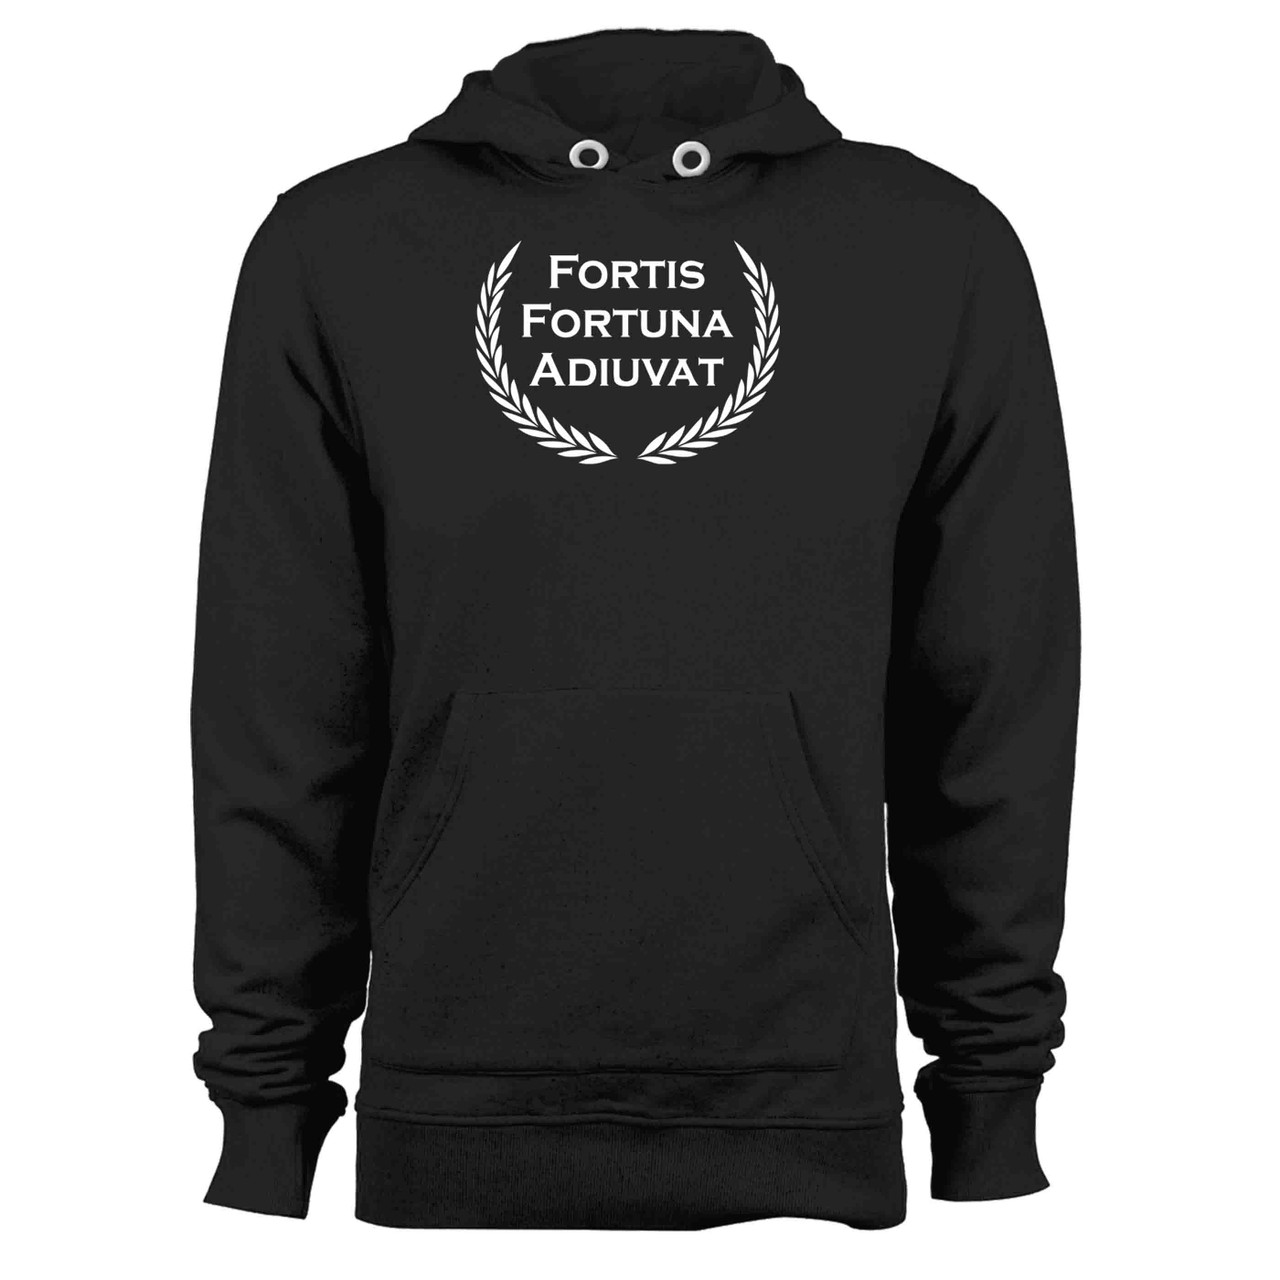 EMBROVERSE Fortis Fortuna Adiuvat Patch - Fortune Chile | Ubuy